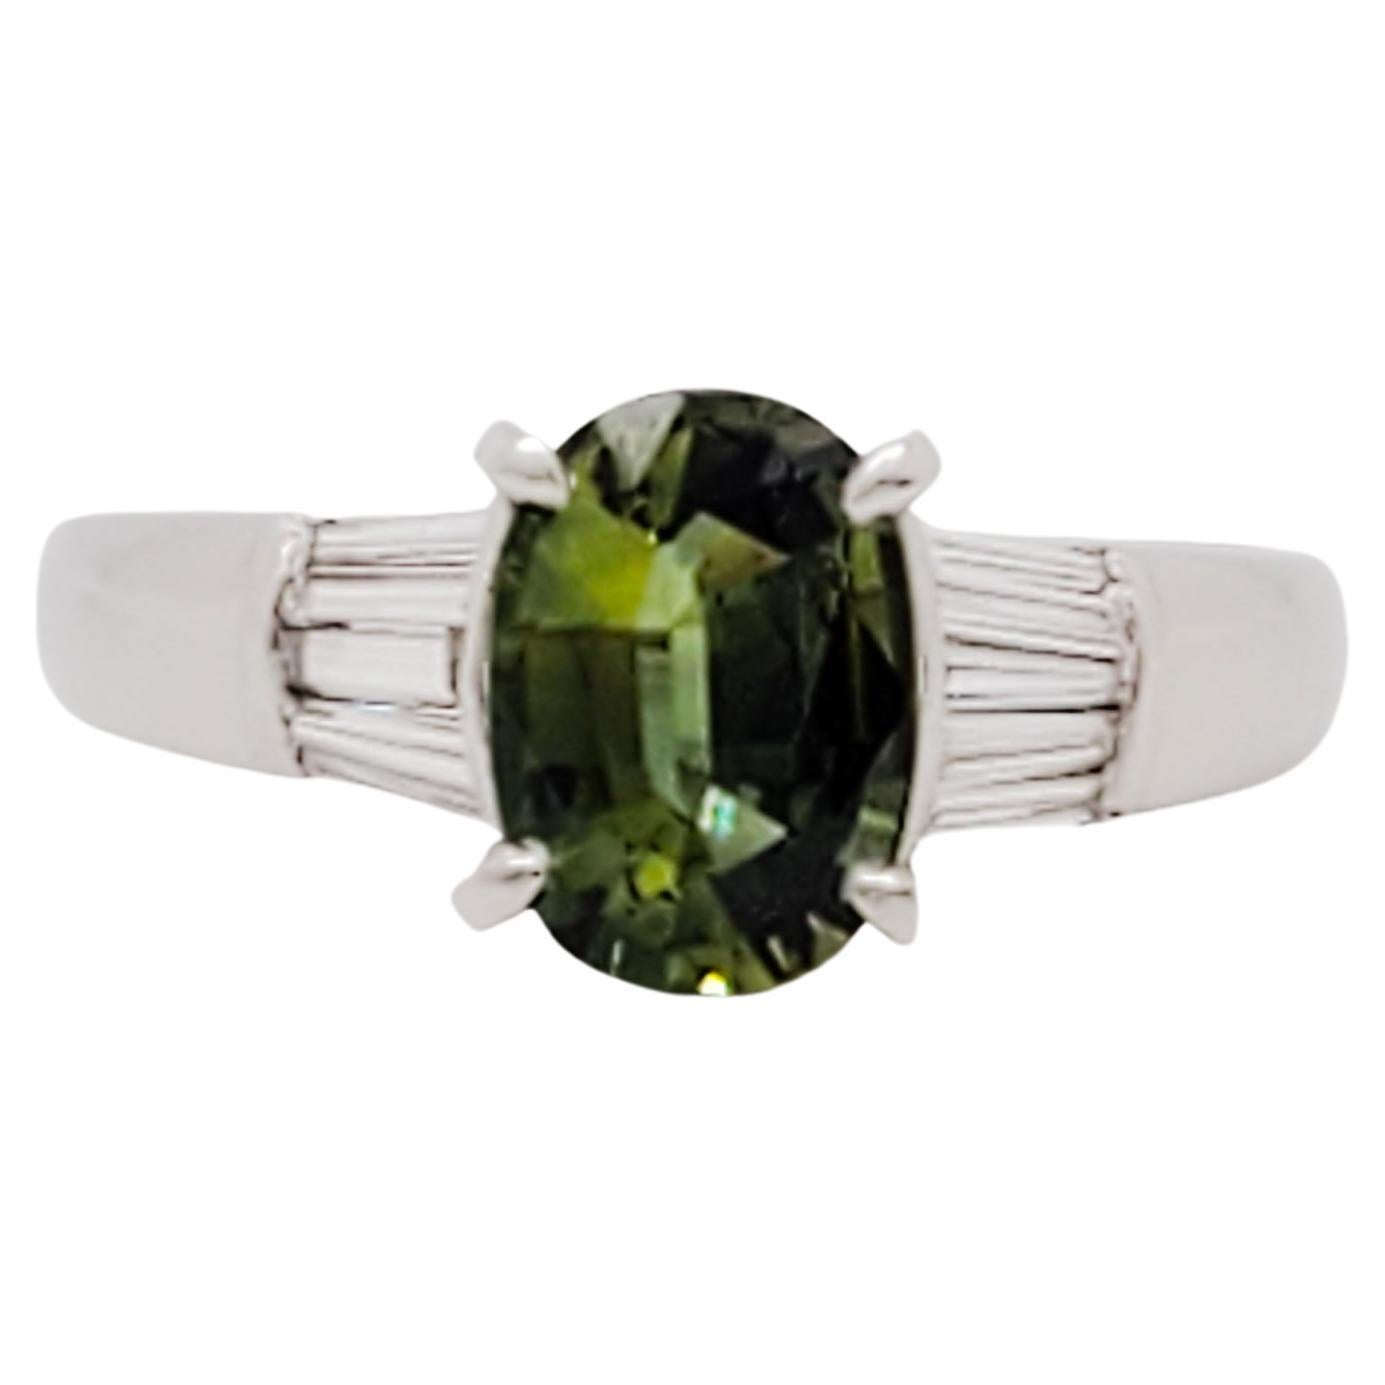 Green Sapphire and Diamond Cocktail Ring in Platinum